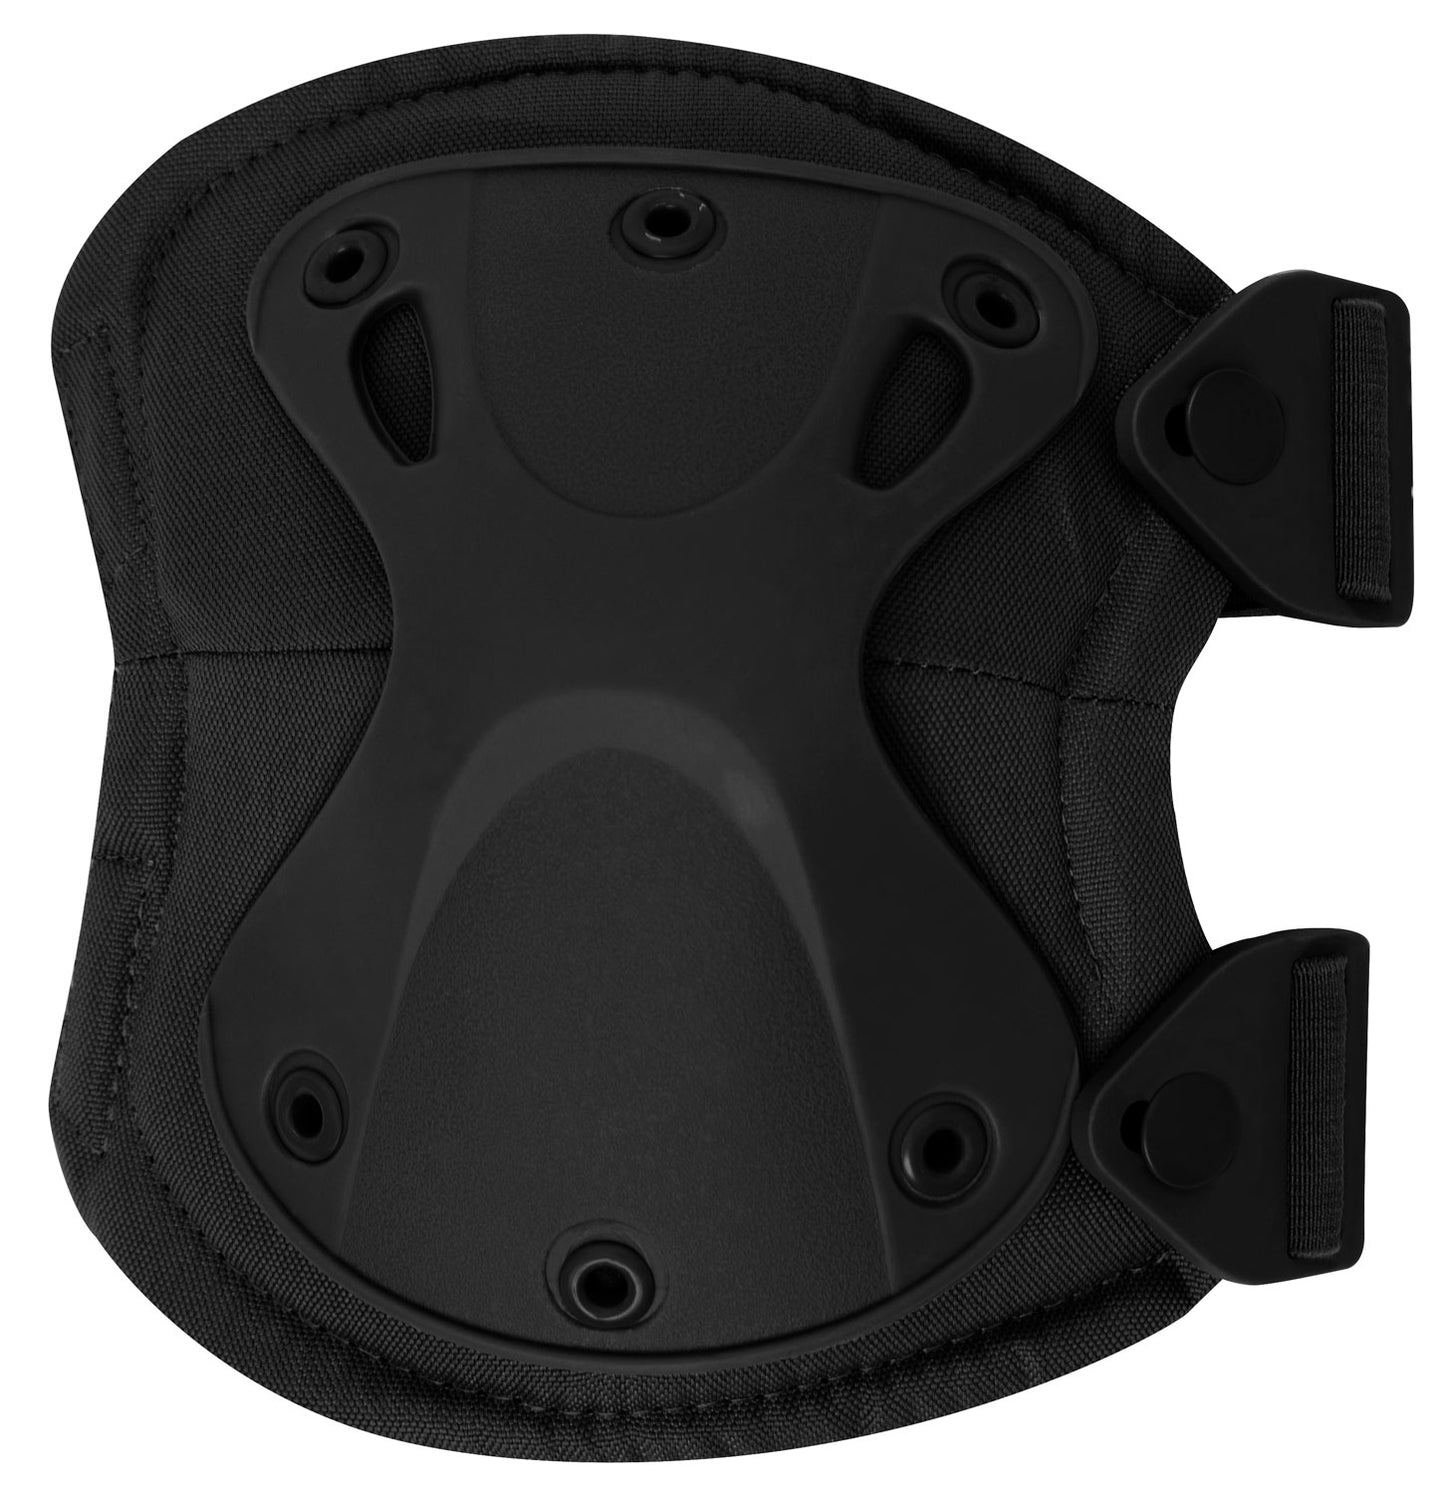 Rothco Low-Profile Tactical Knee Pads